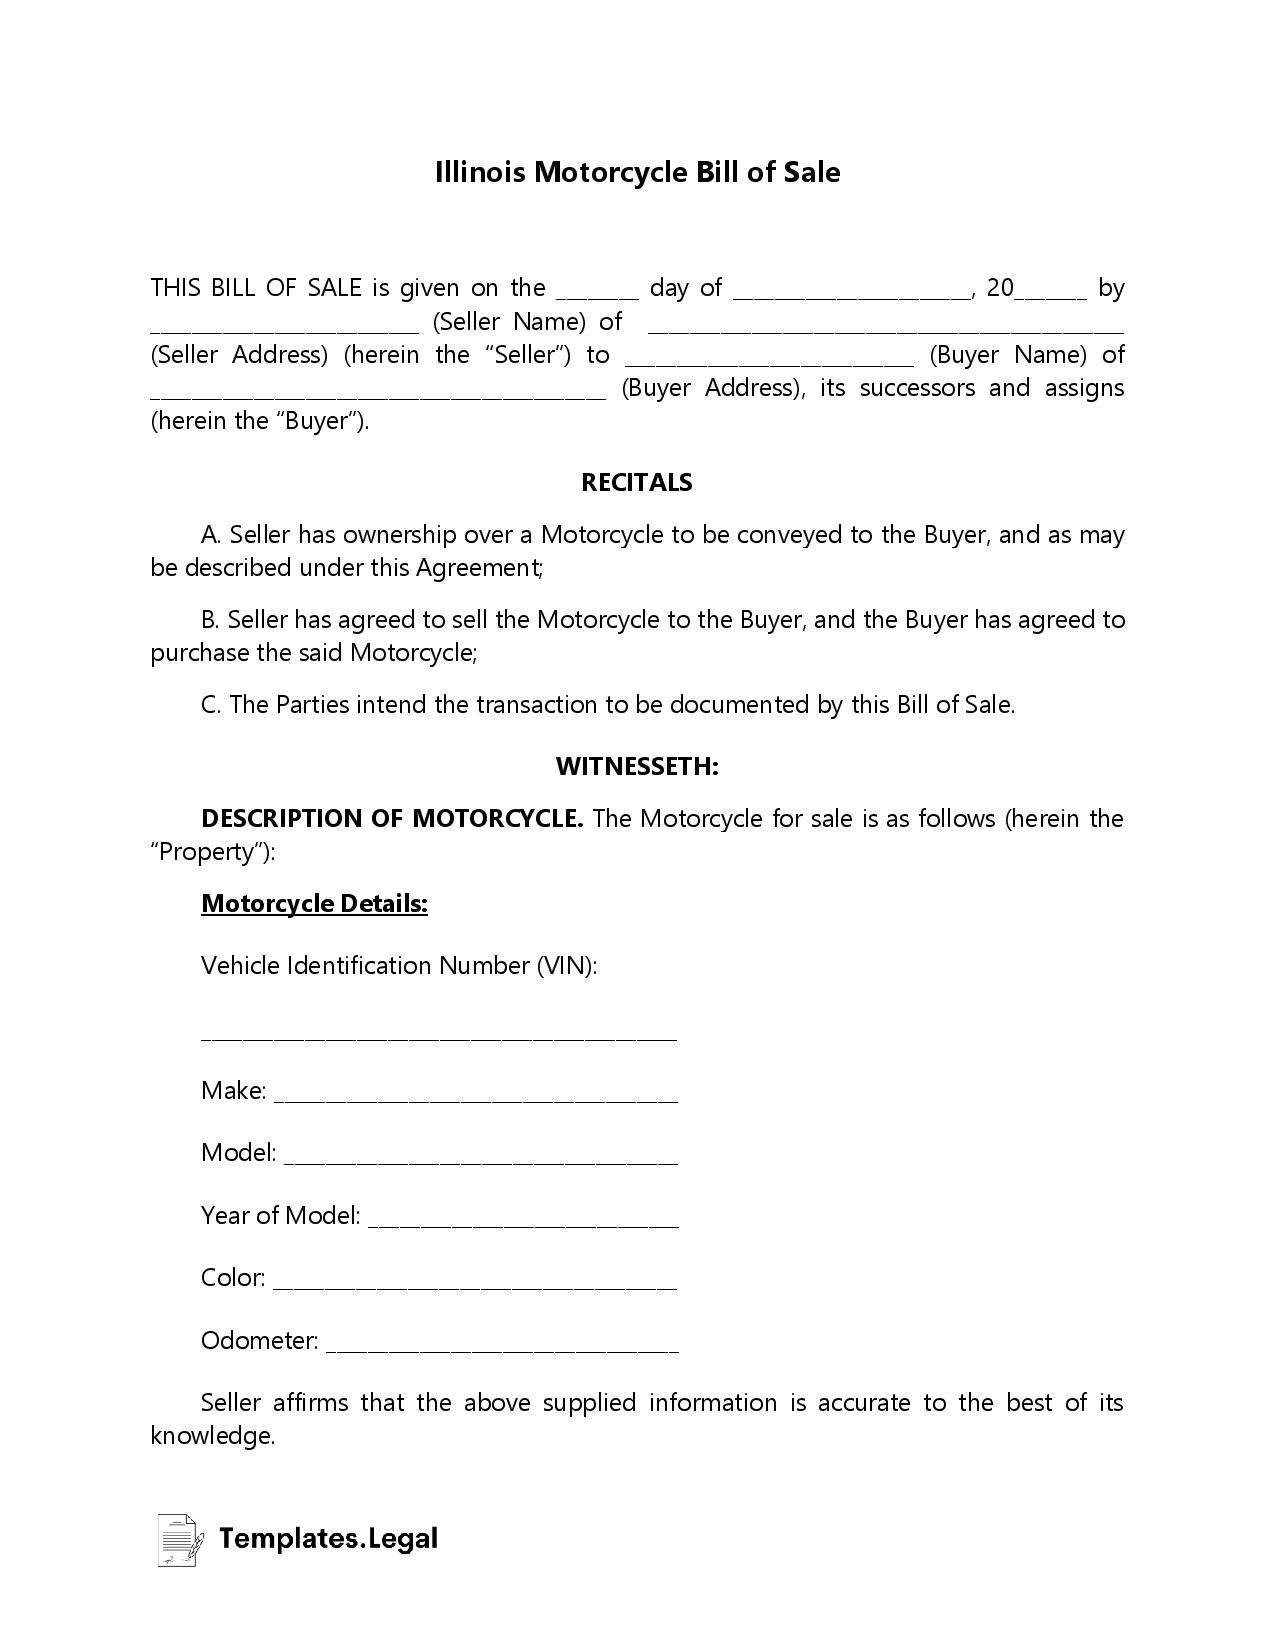 Illinois Motorcycle Bill of Sale - Templates.Legal